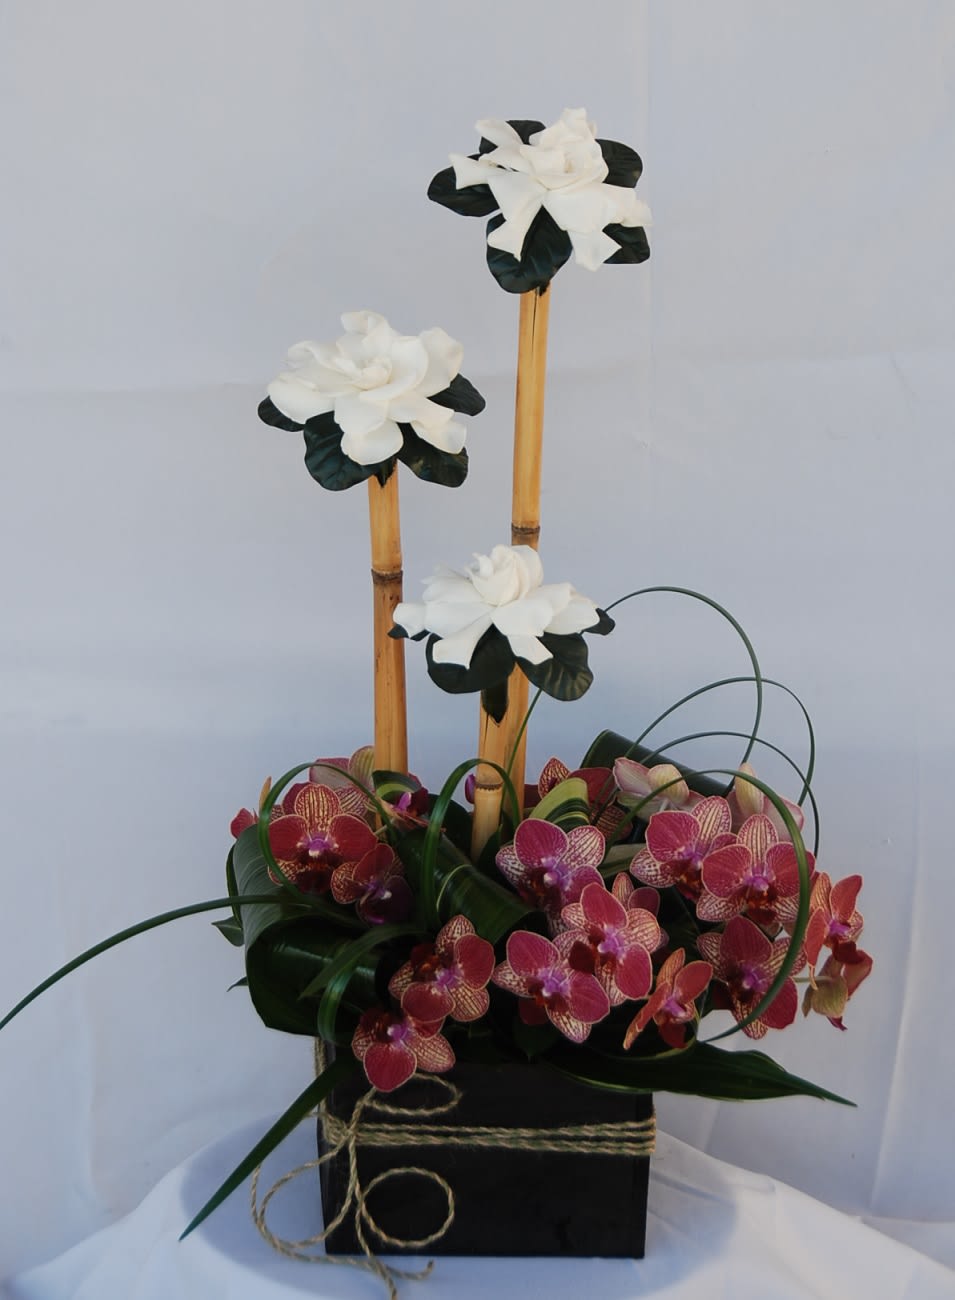 A fragrant arrangement of gardenias and beautiful phalaenaopsis orchids in wooden box.